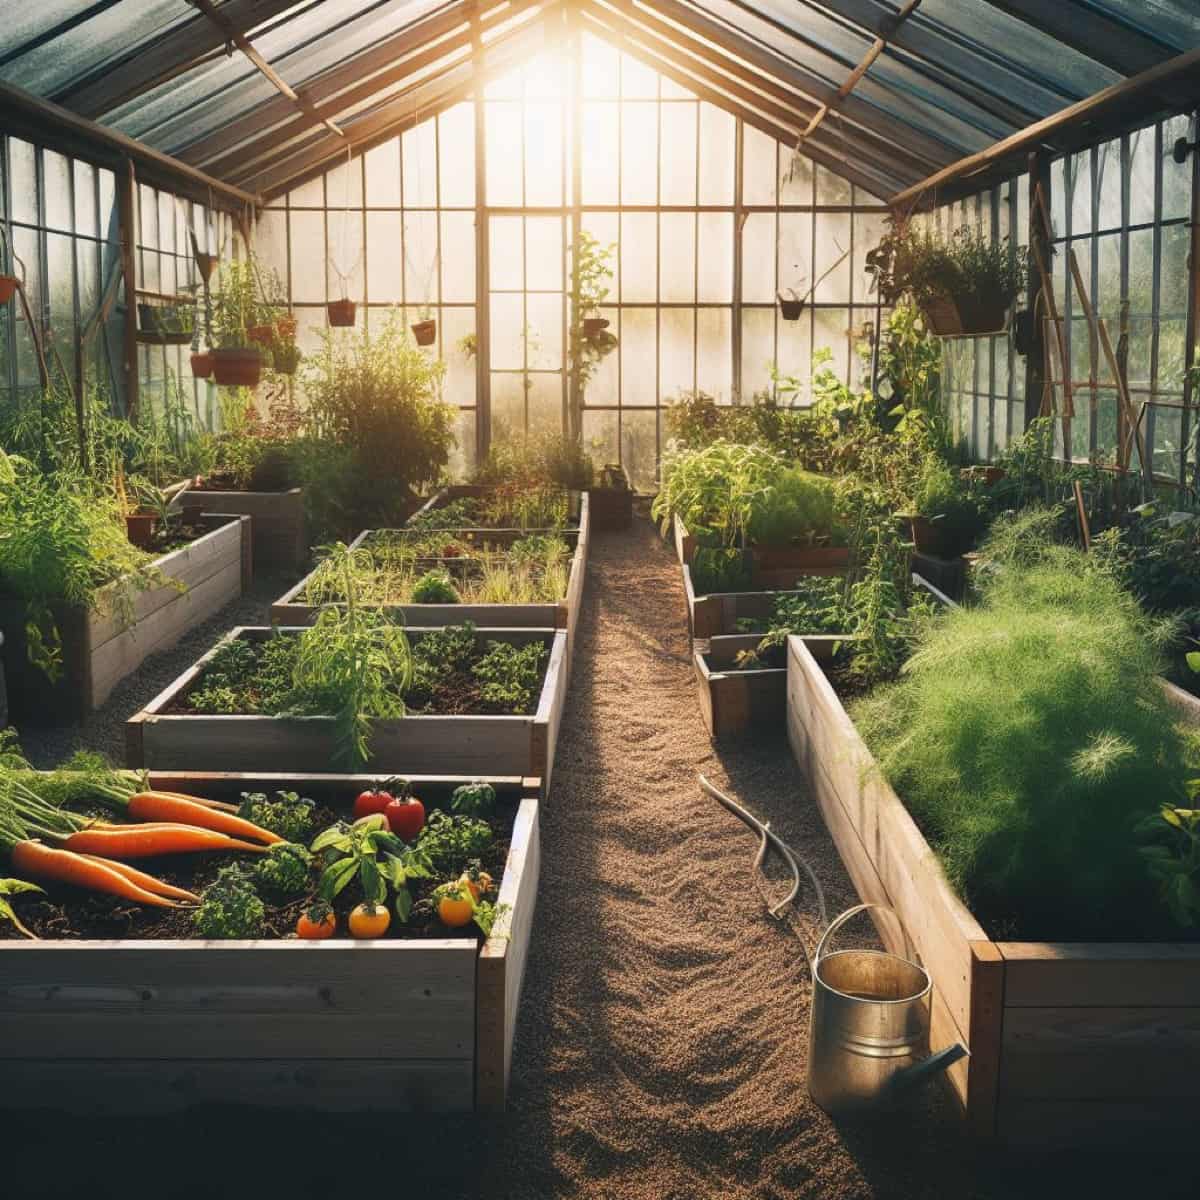 Harvesting Vegetables from Greenhouse in a Raised Bed